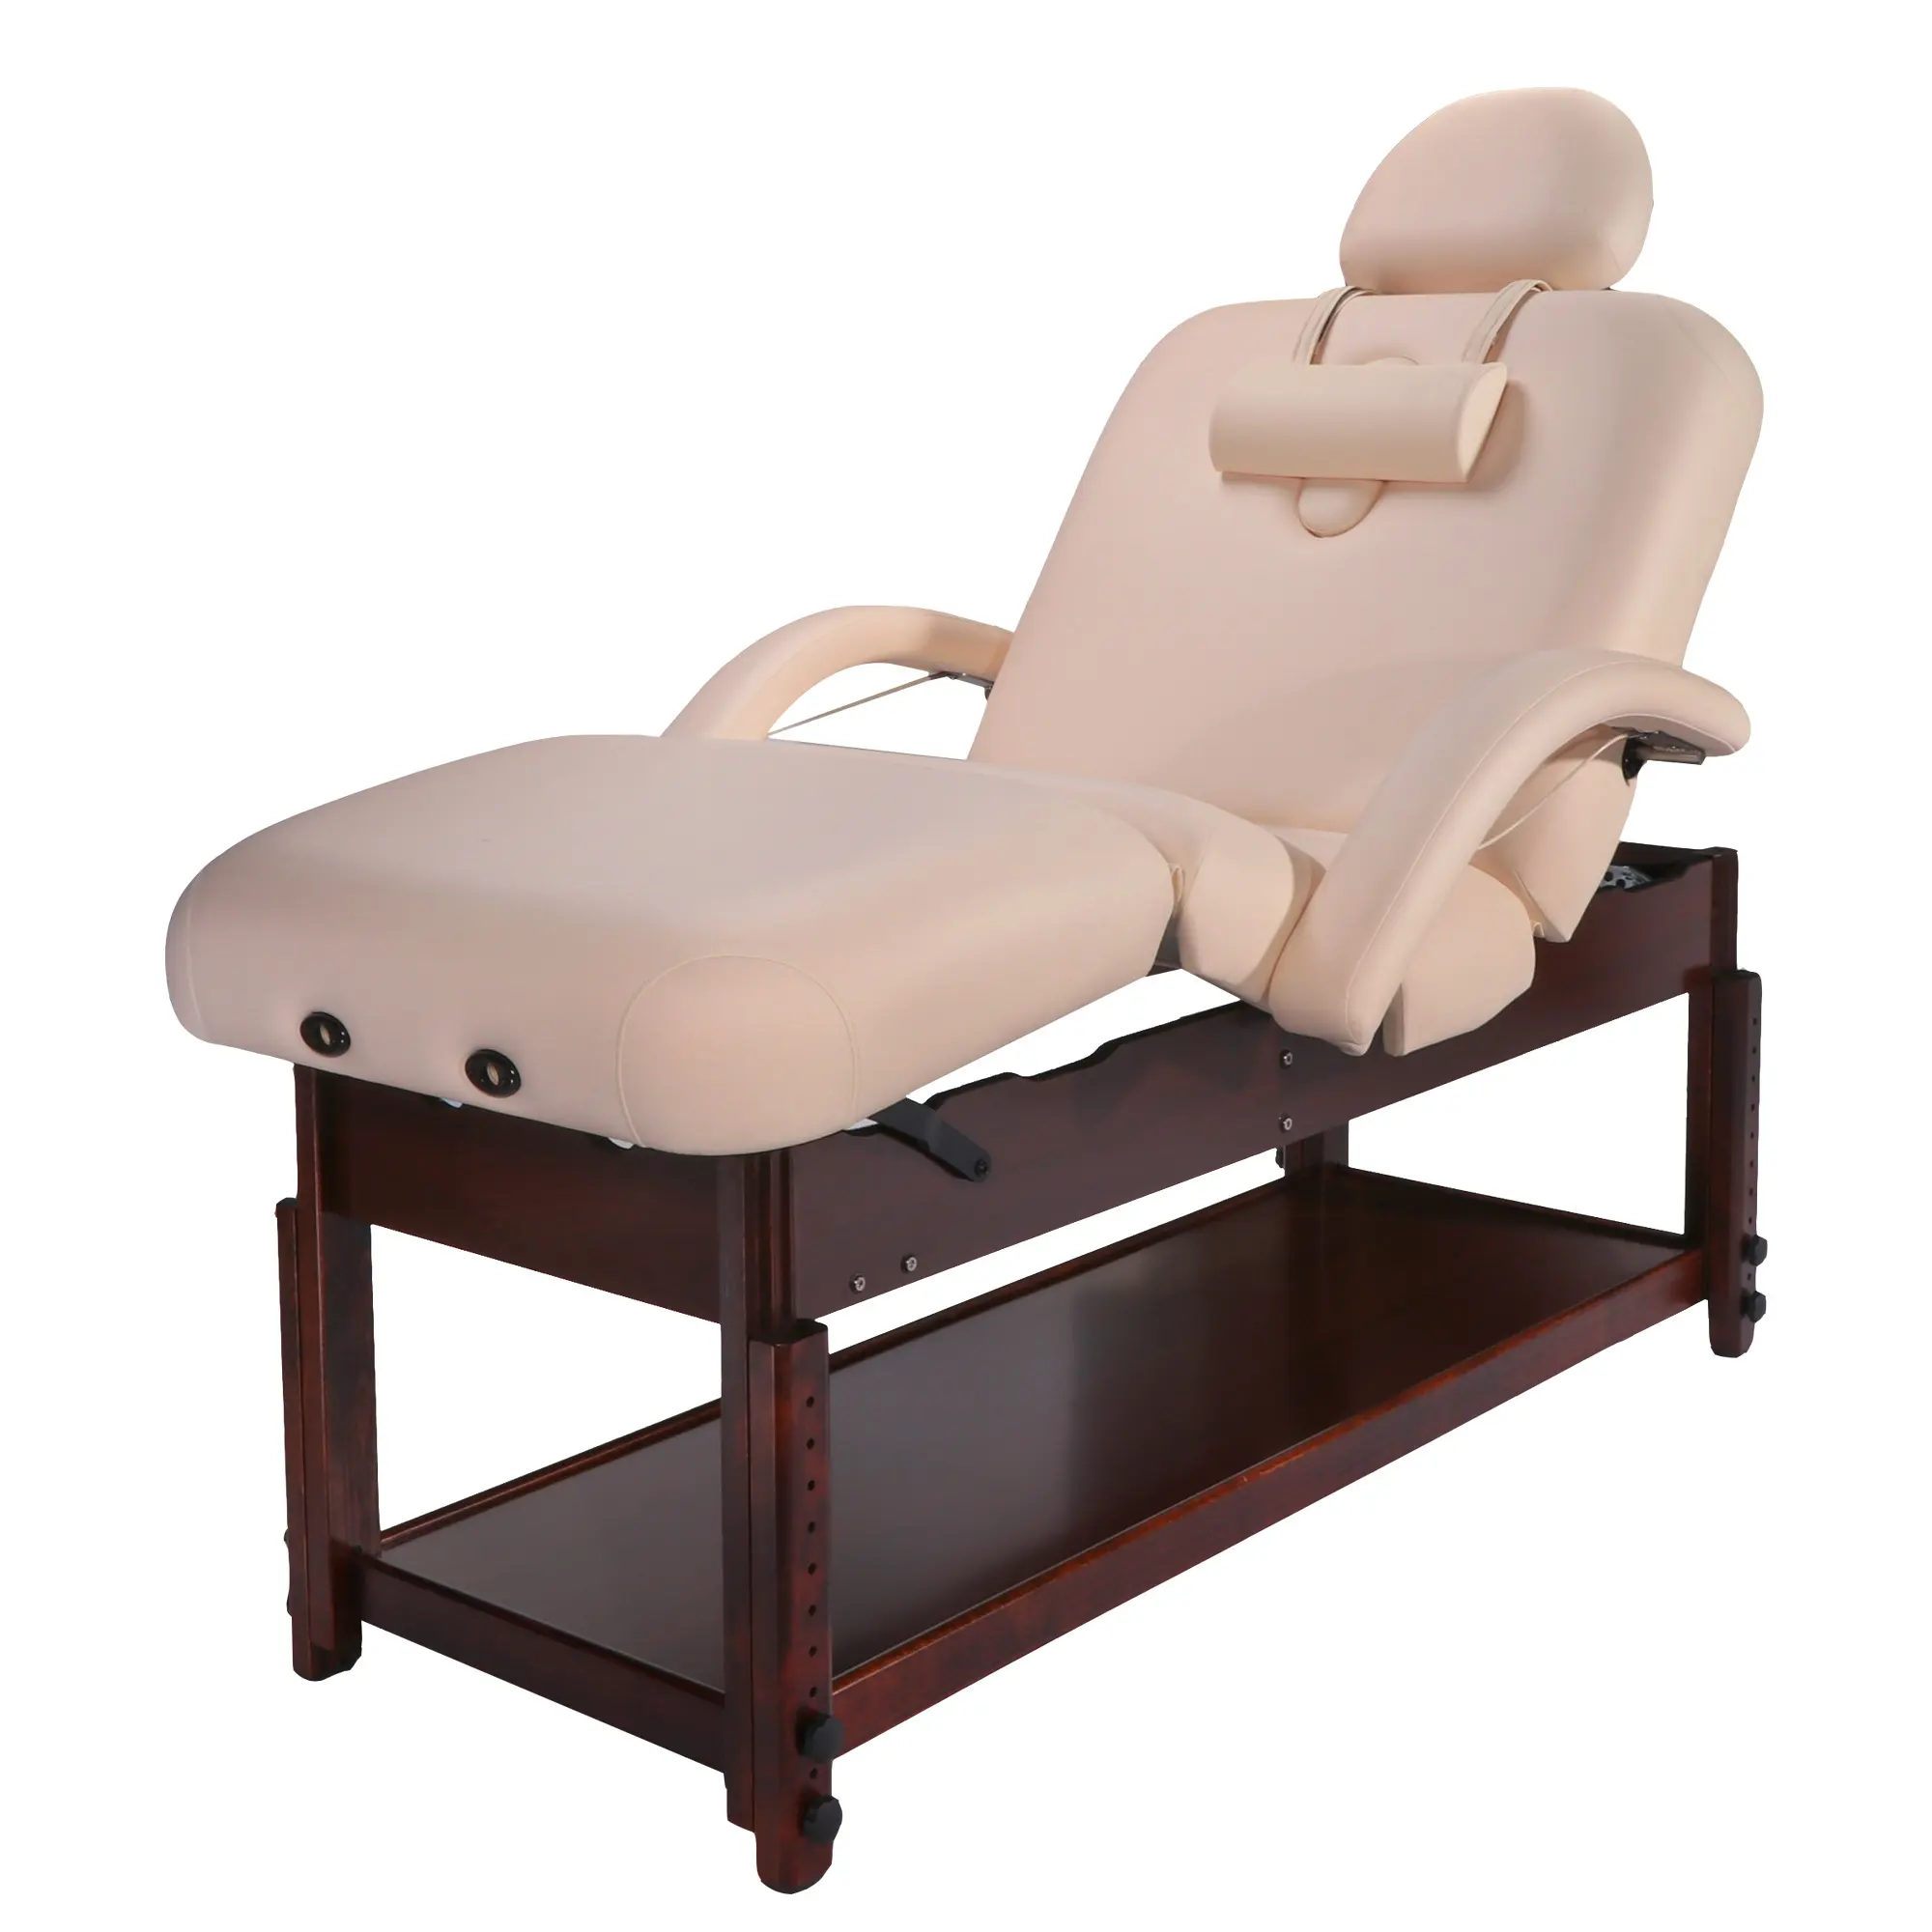 Archer-Deluxe series stationary massage table wood massage table facial table